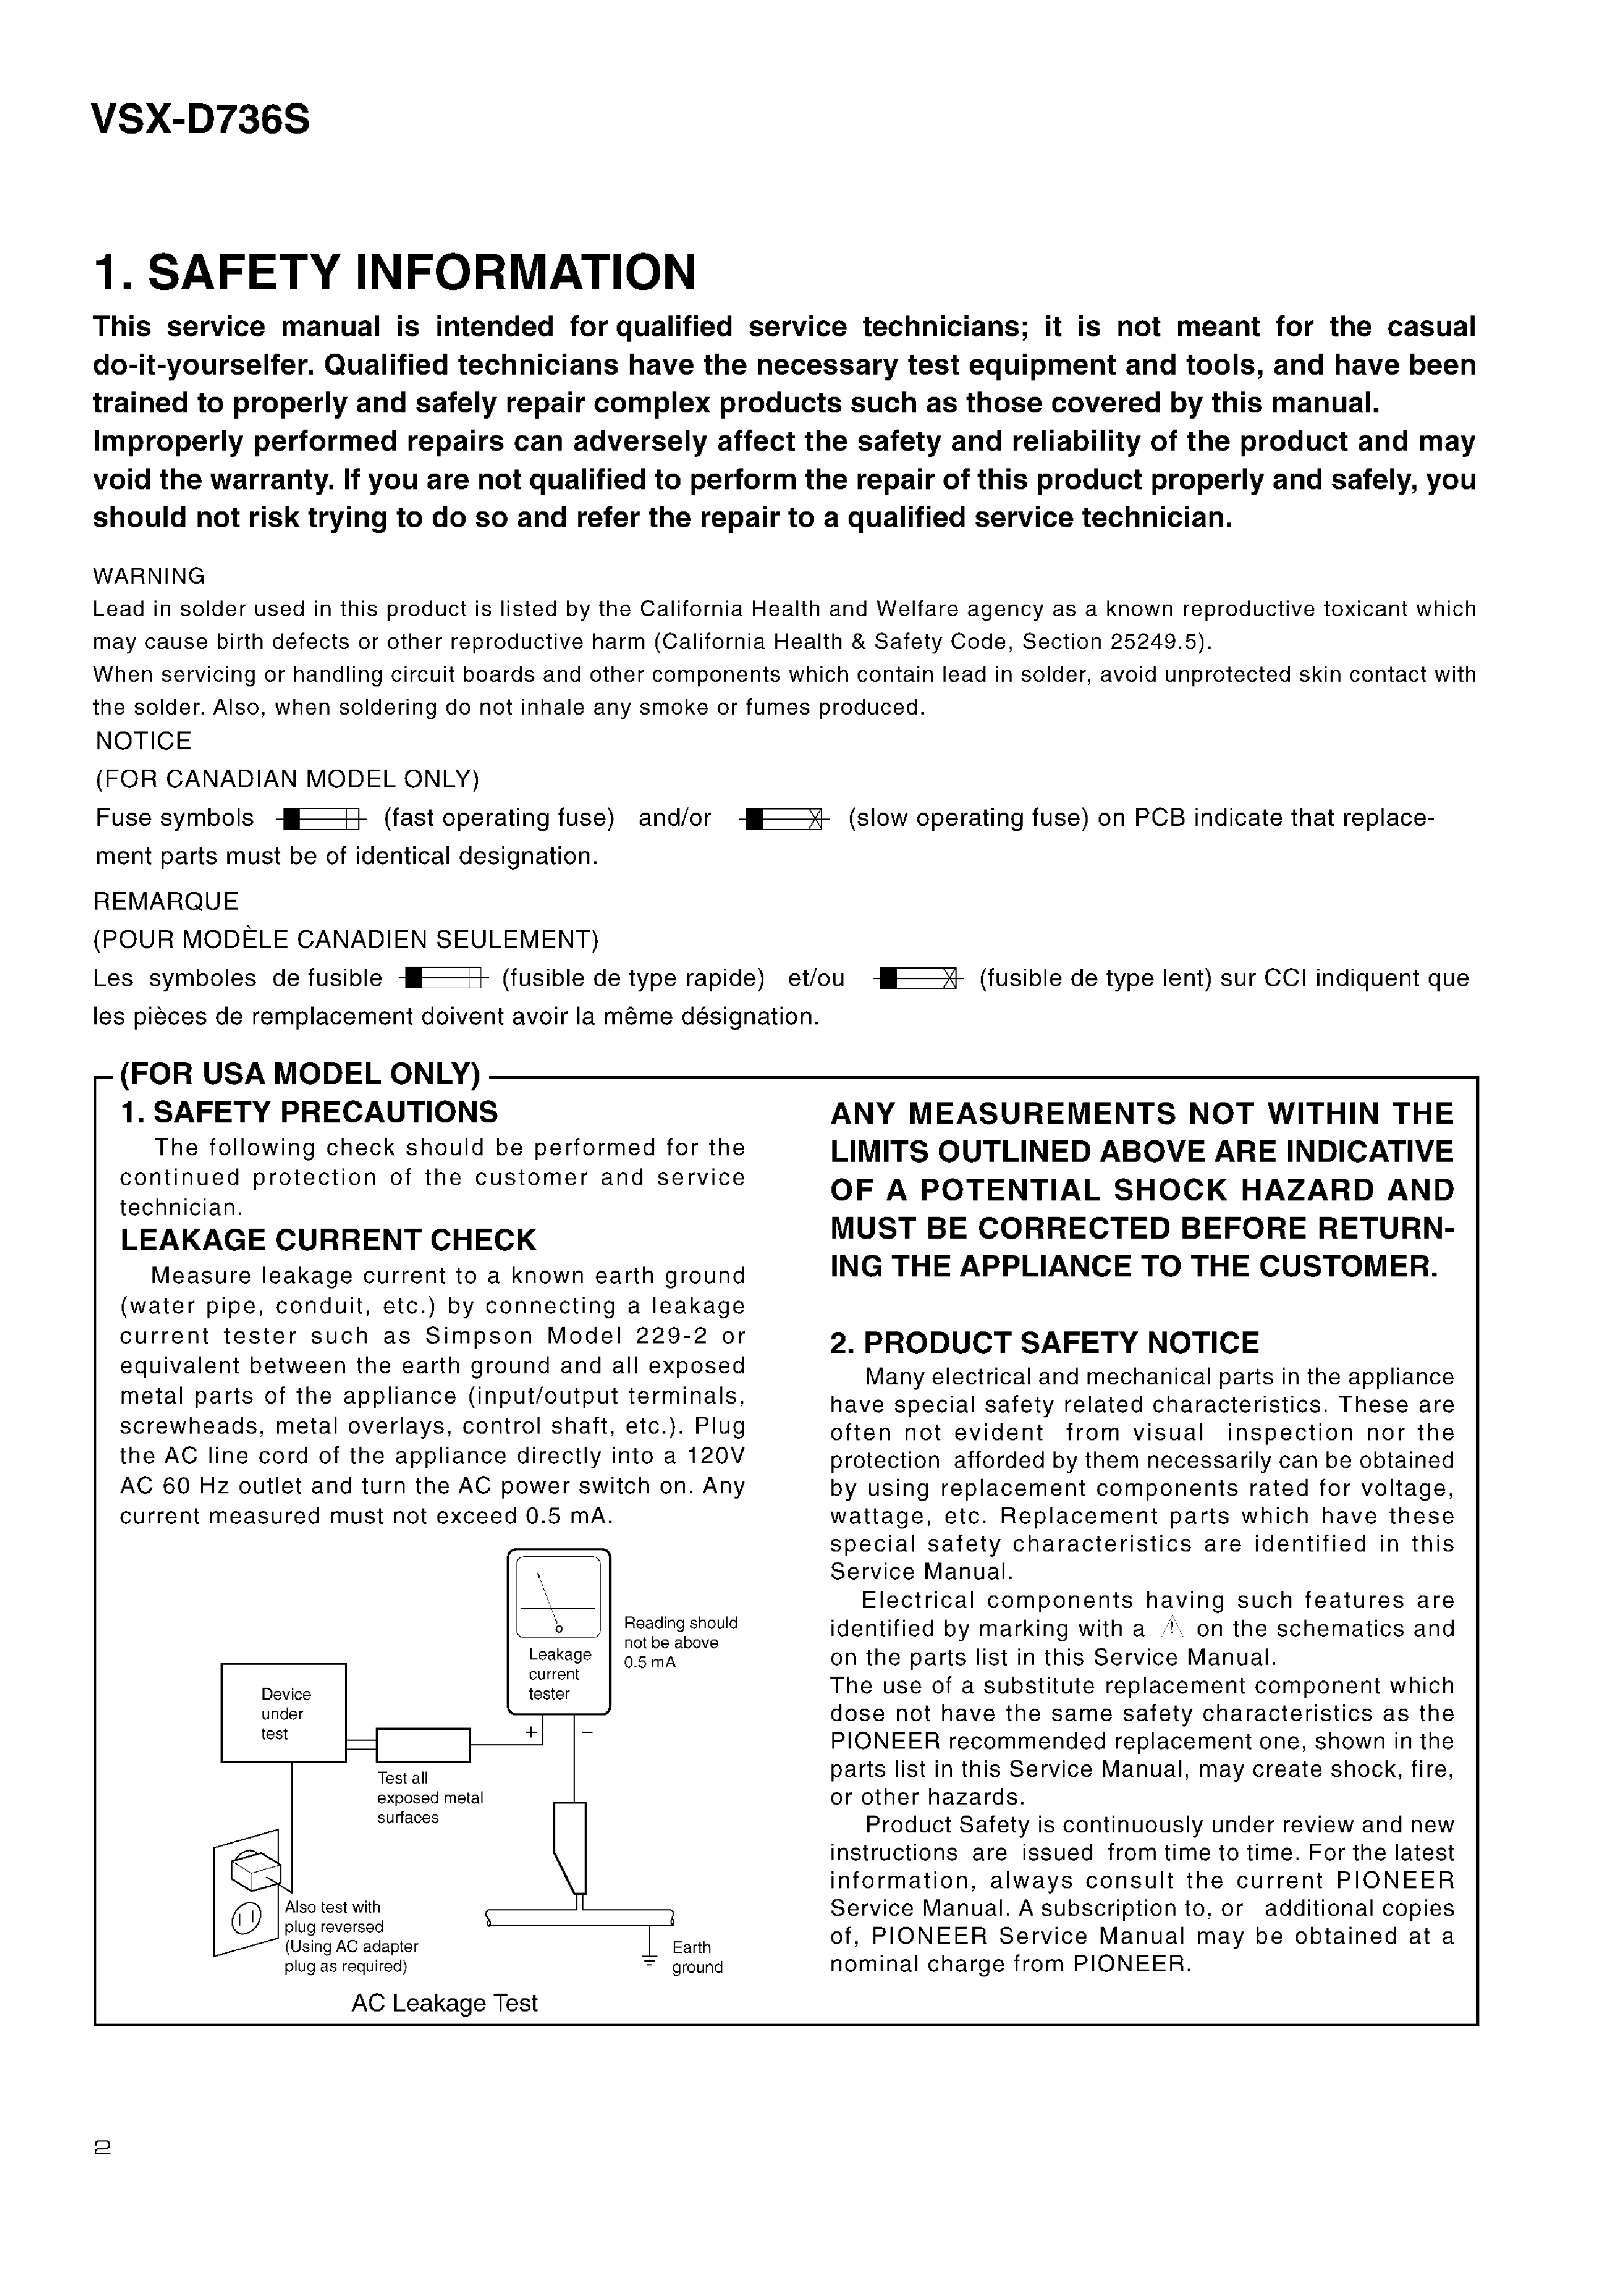 PIONEER VSX-D736S SM service manual (2nd page)